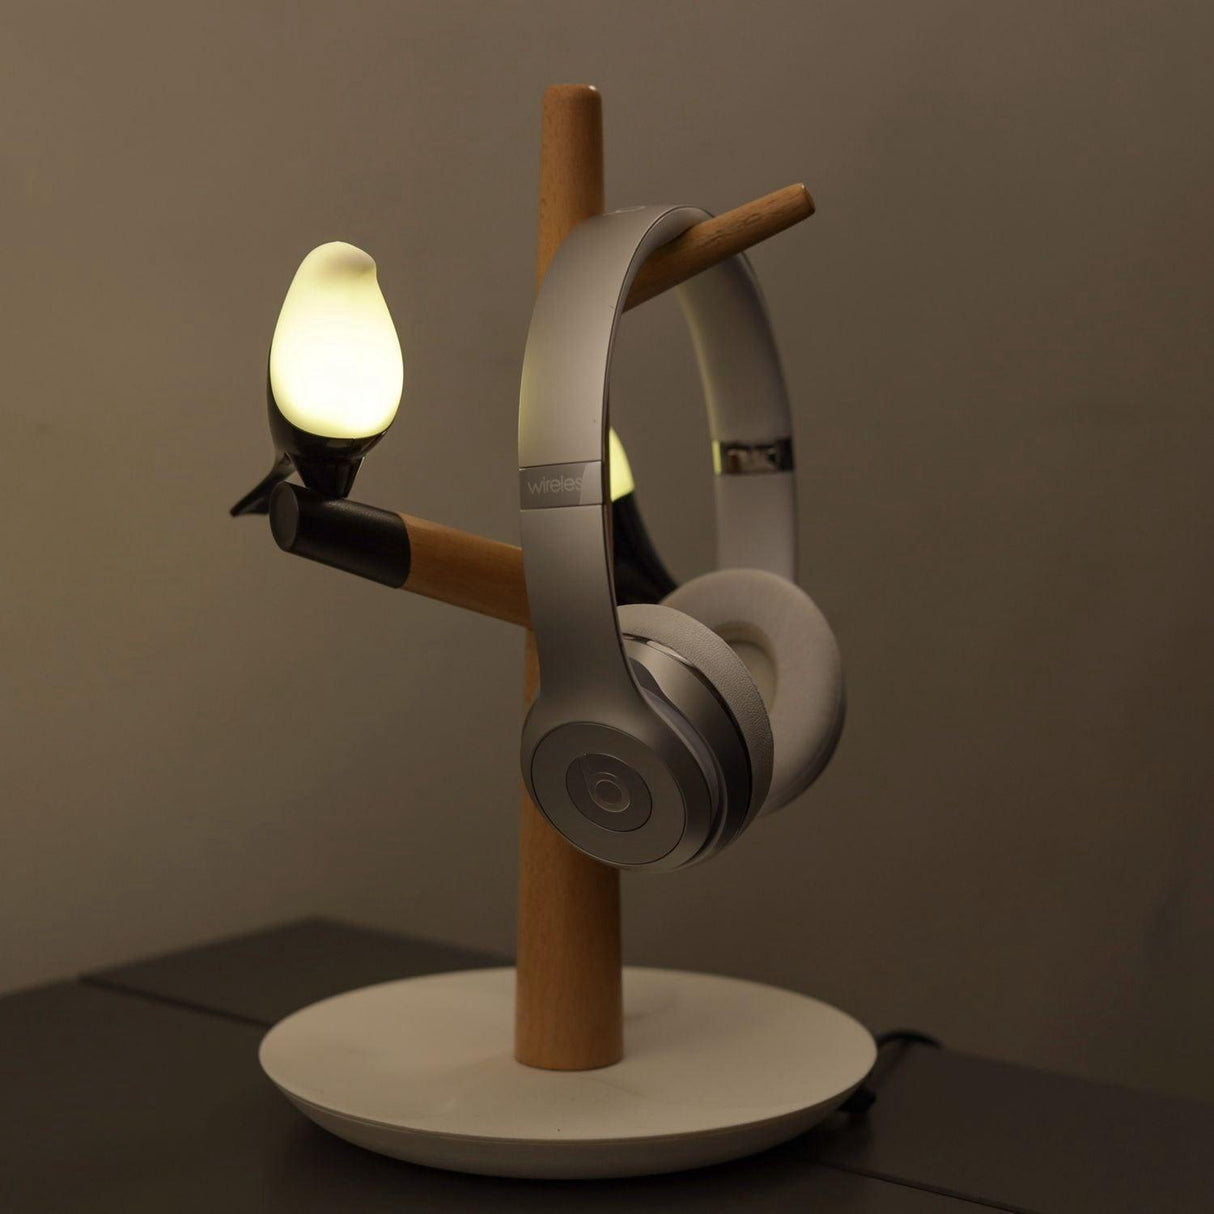 Perch Table Lamp - Wireless Charger - BLISOME